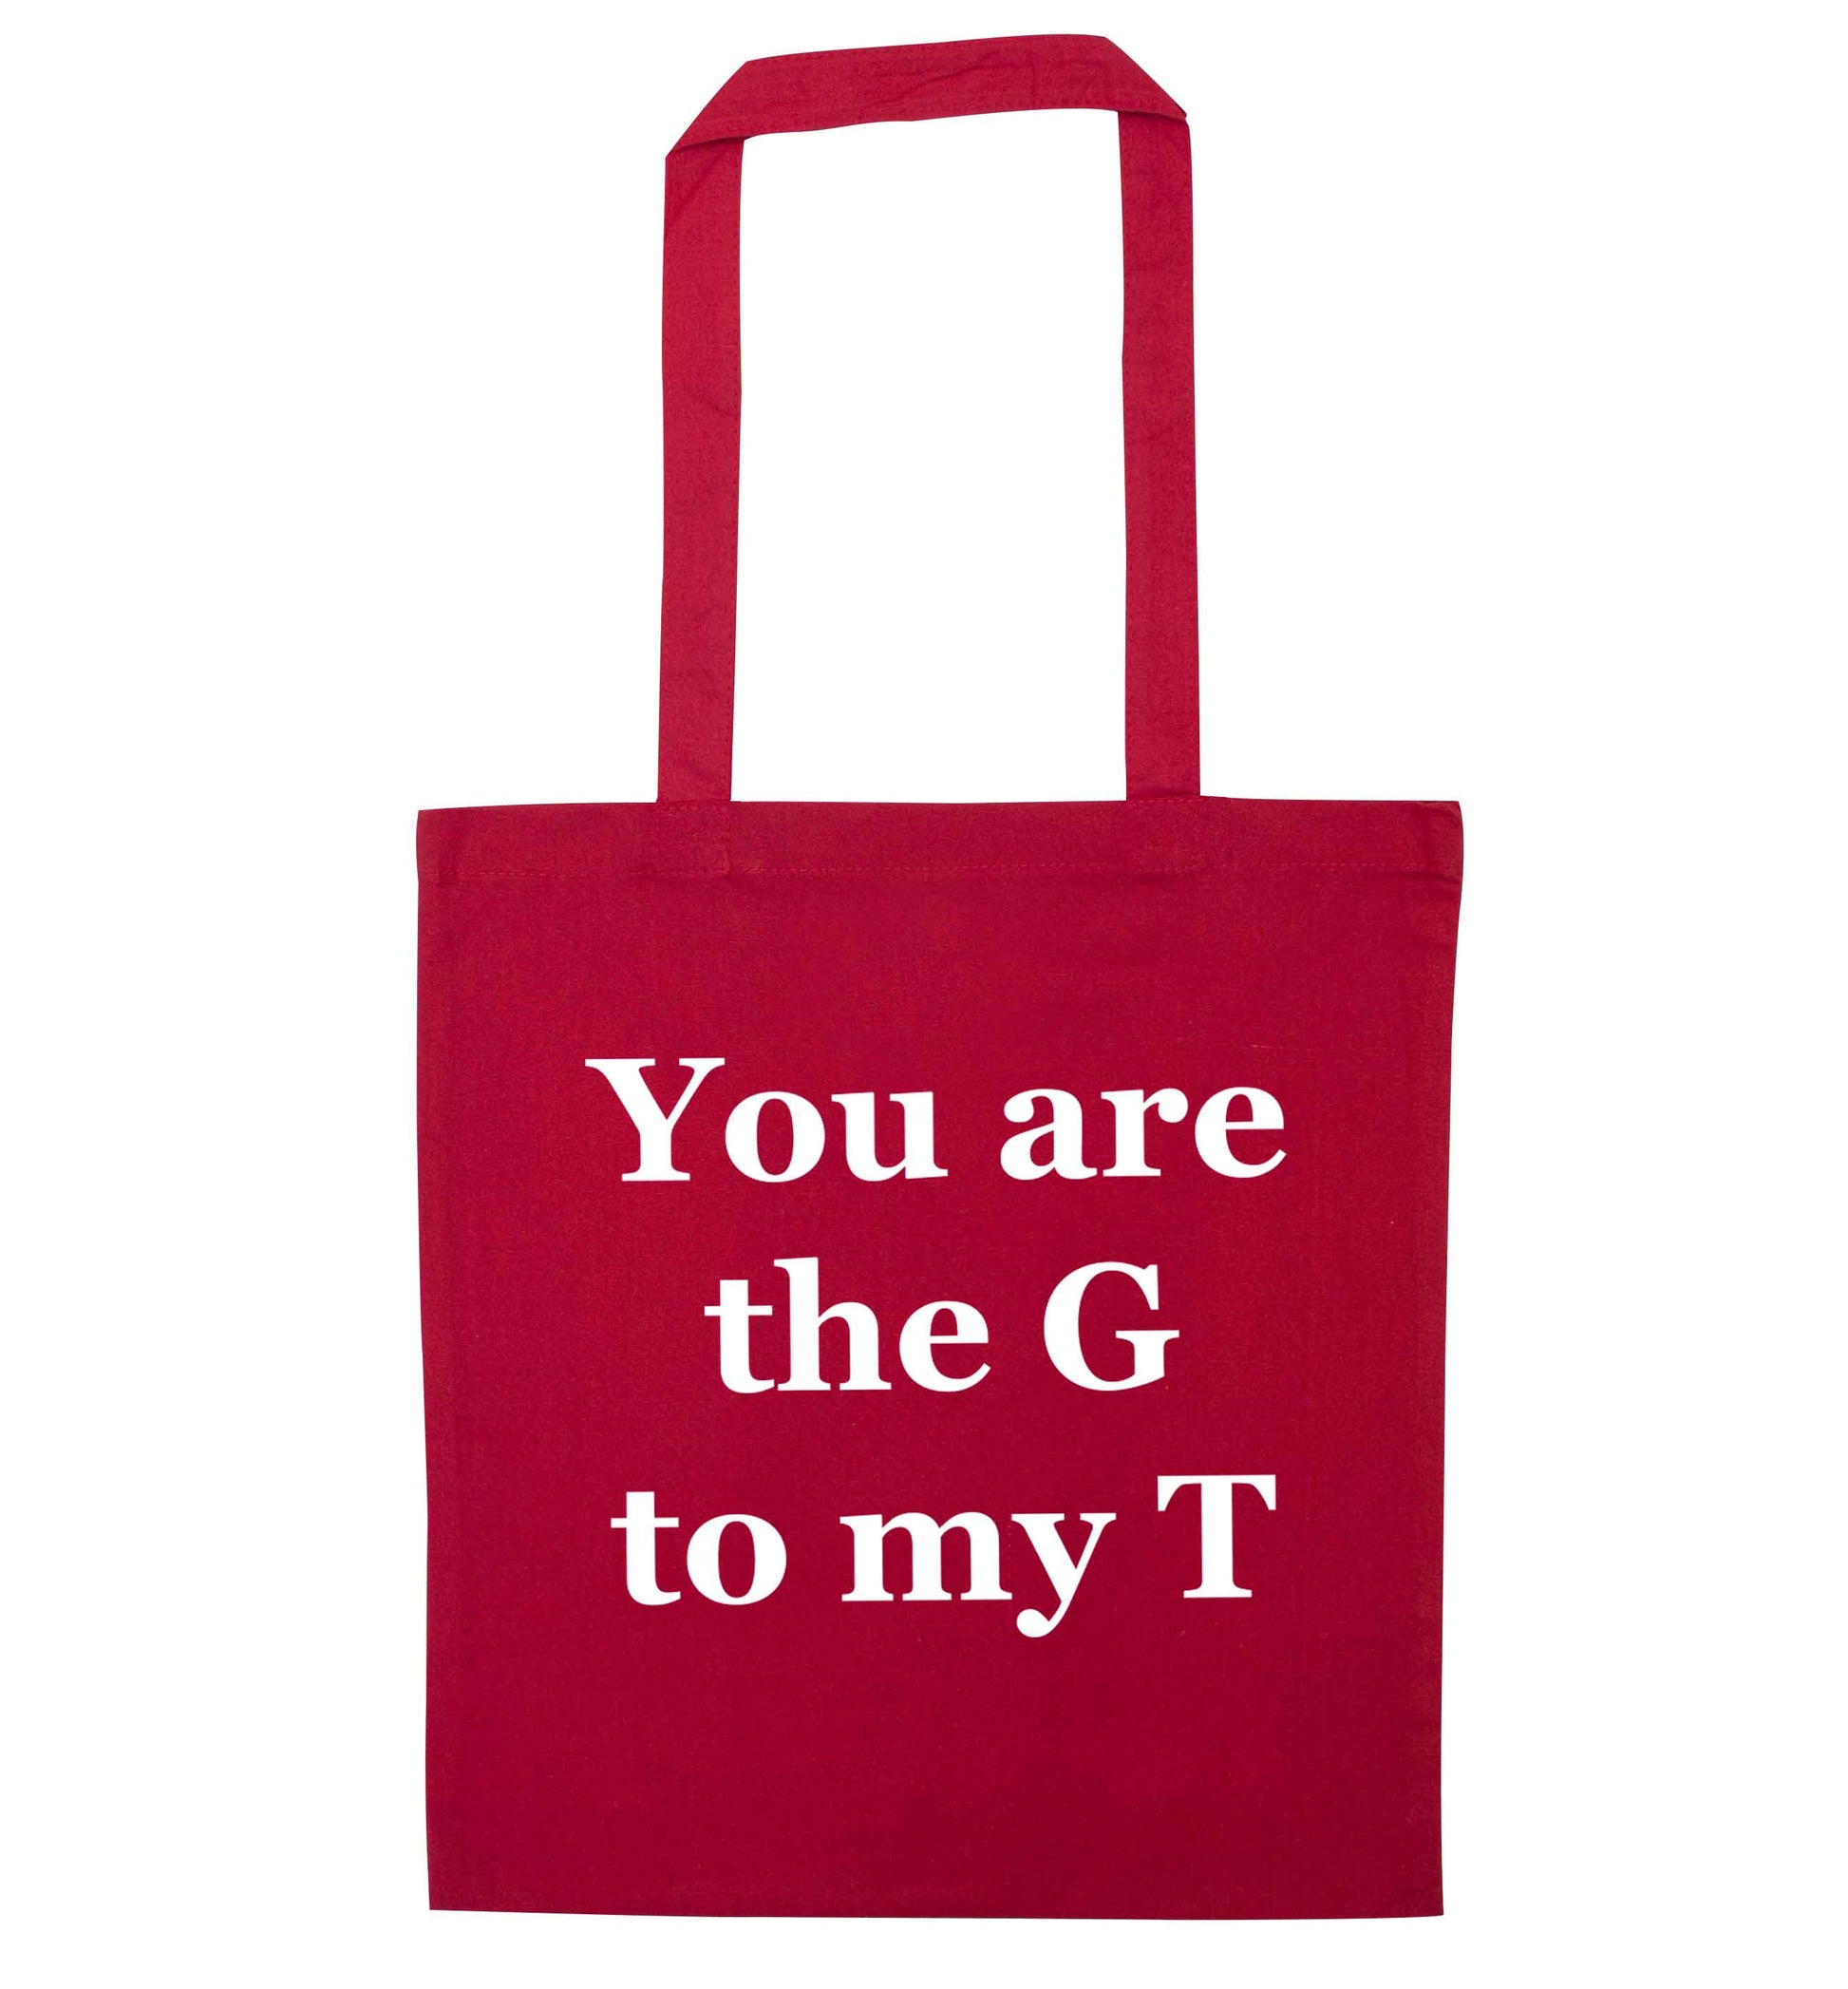 You are the G to my T red tote bag